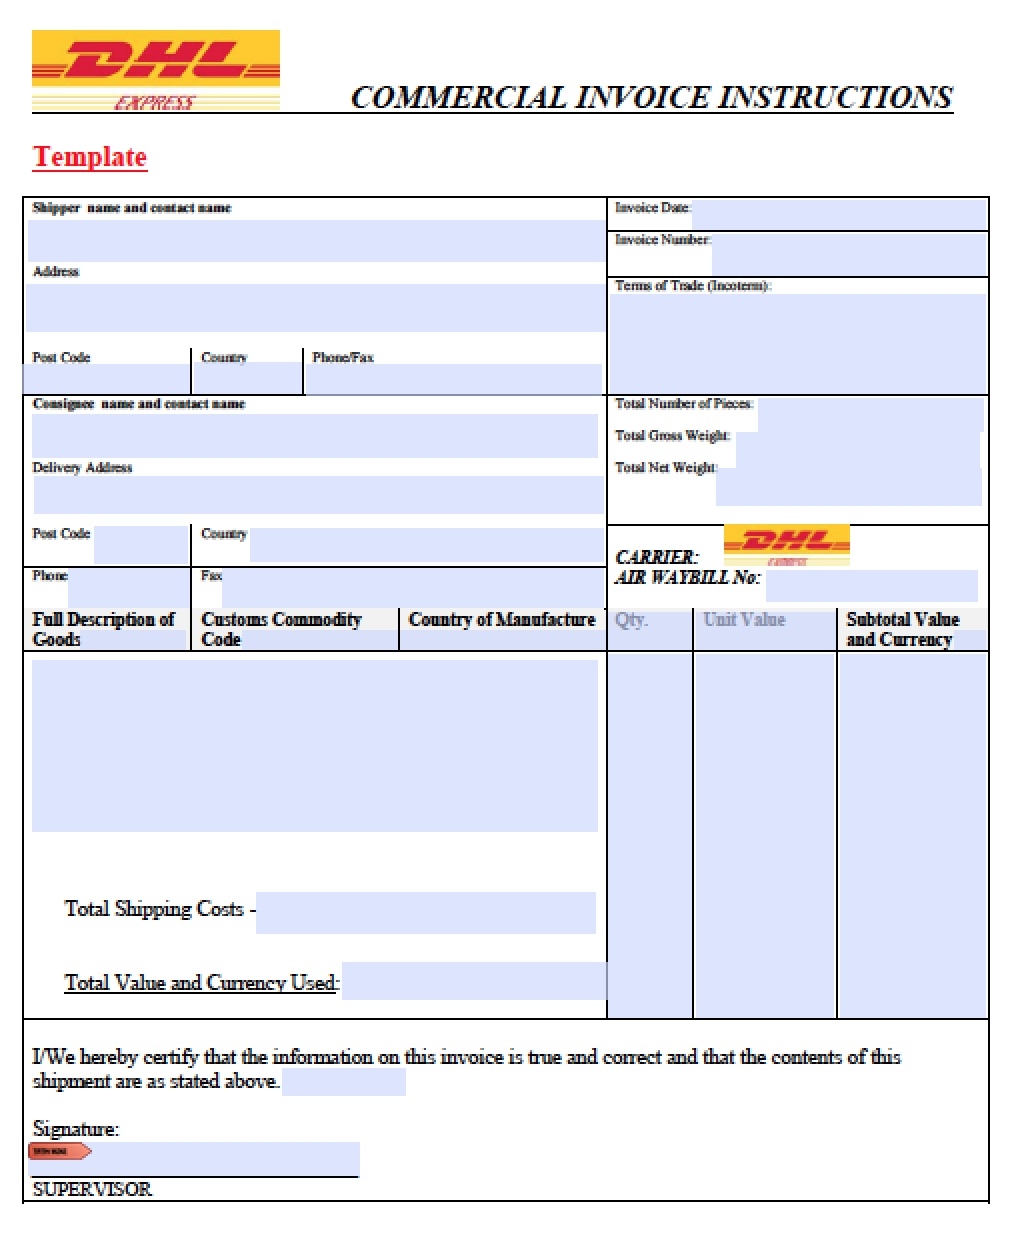 commercial invoice template dhl free dhl commercial invoice template excel pdf word doc 1022 X 1244